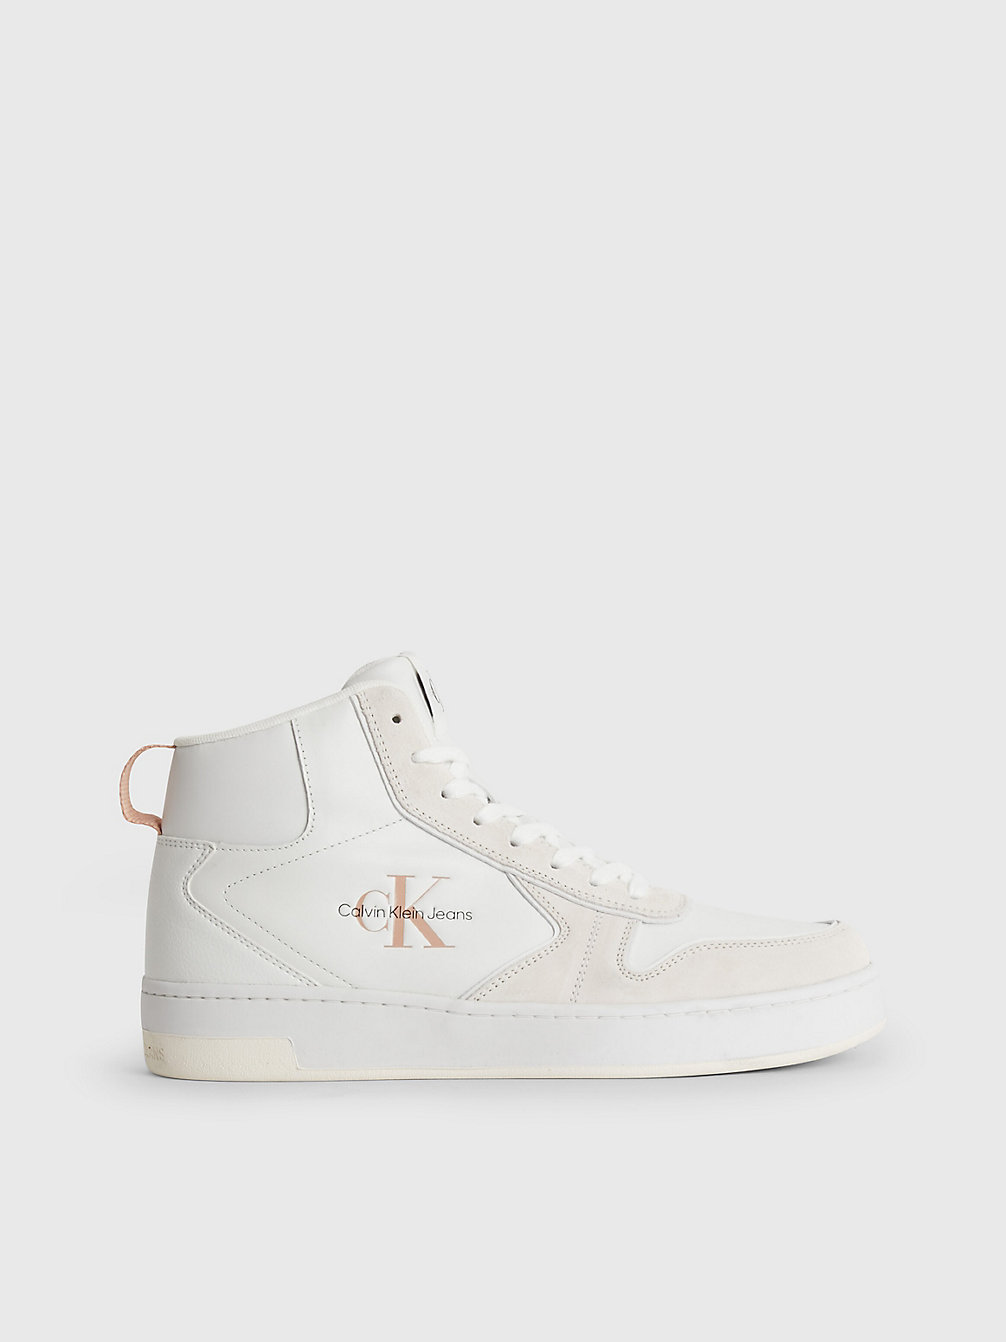 WHITE/ANCIENT WHITE Leather High-Top Trainers undefined women Calvin Klein